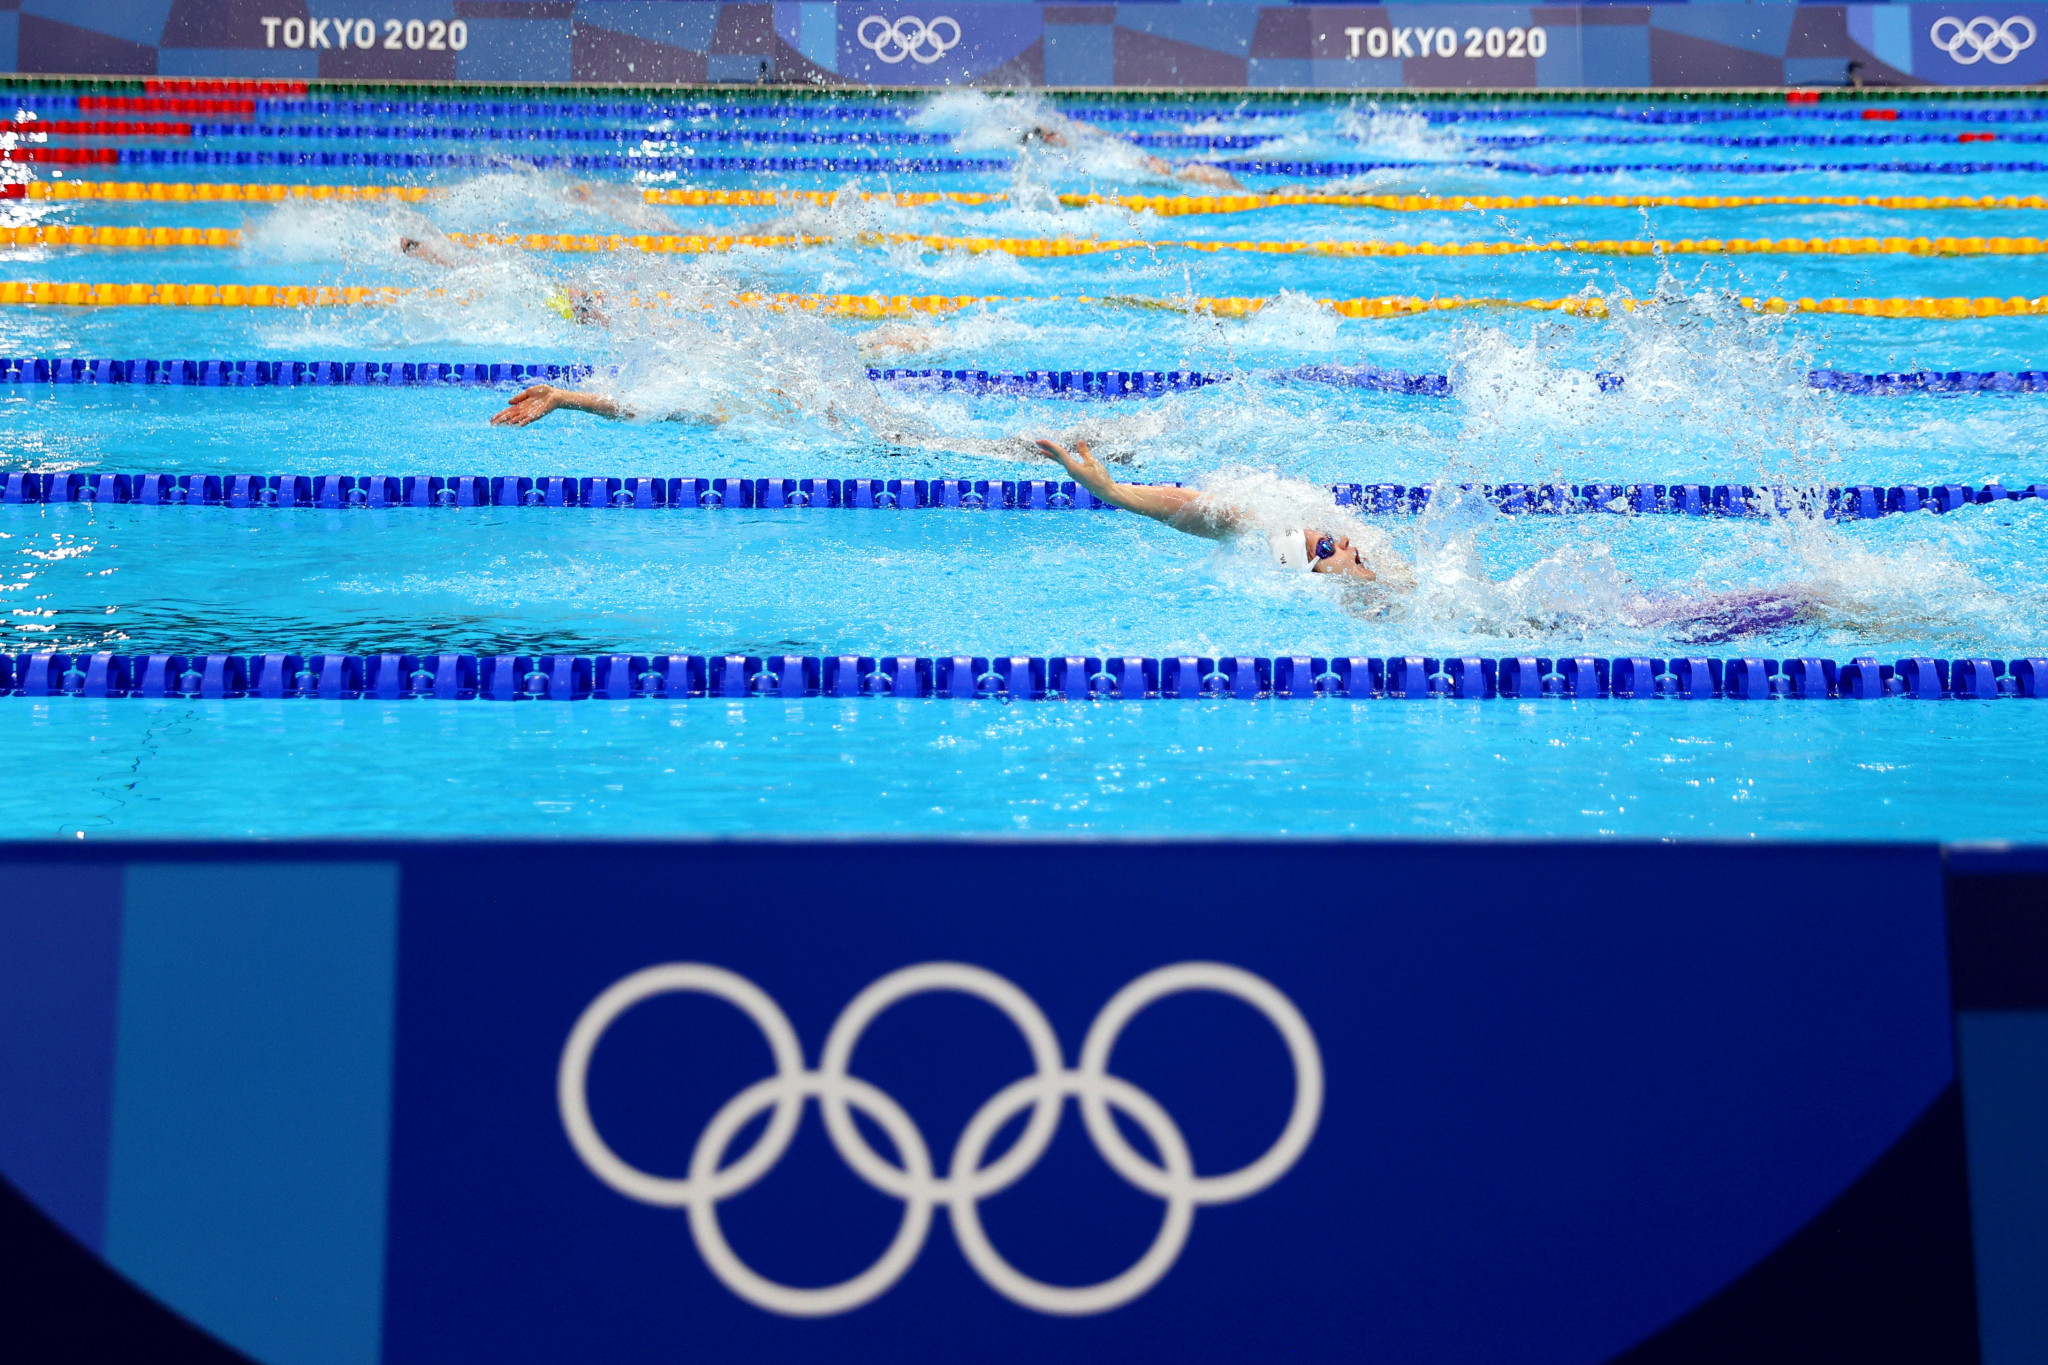 Paris 2024 swim qualifying times published by IOC ‘out of date’, FINA says